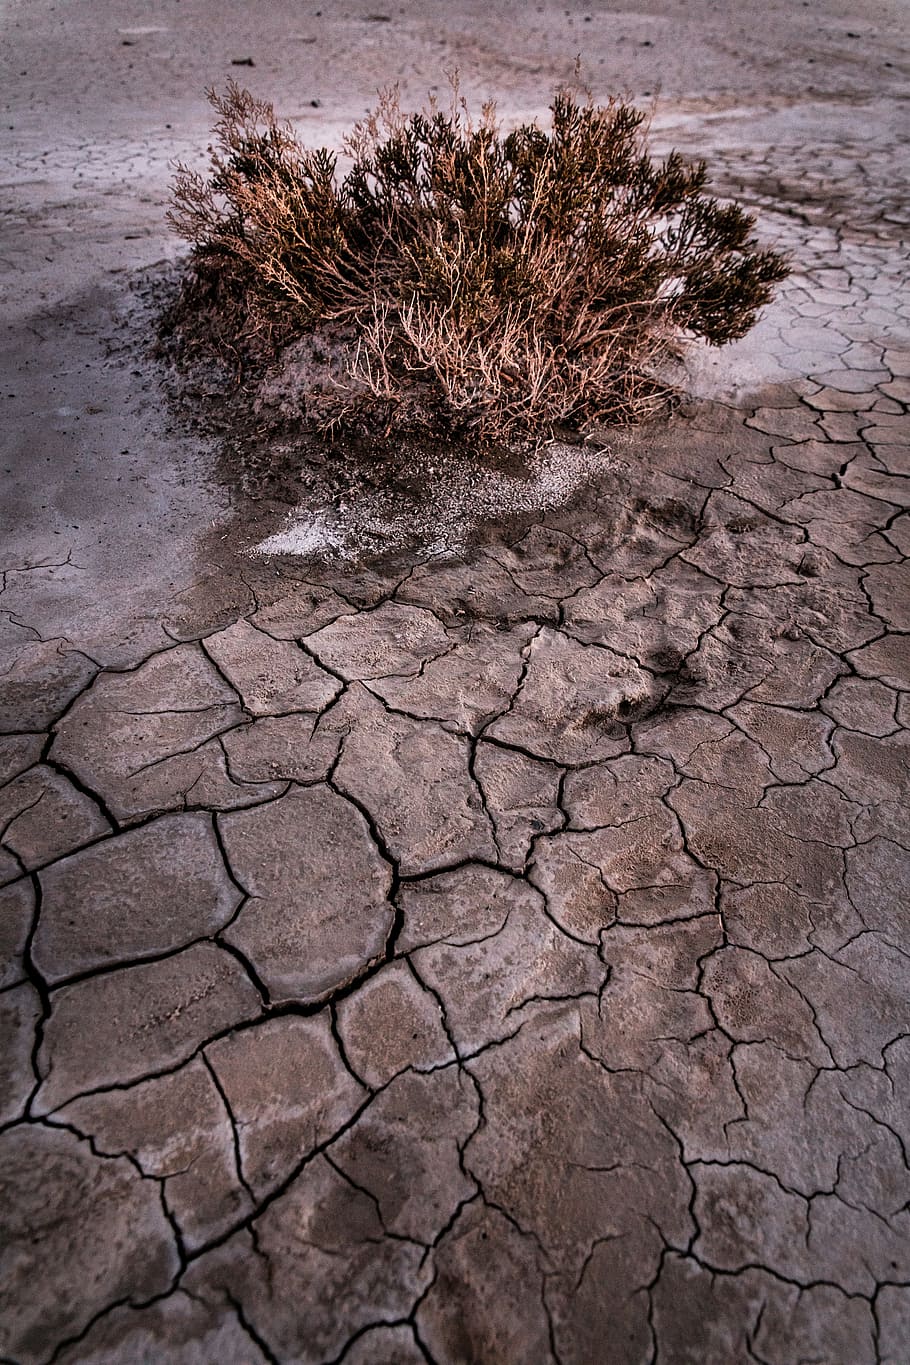 brown bush on cracked soil, nature, outdoors, arid, earth, texture